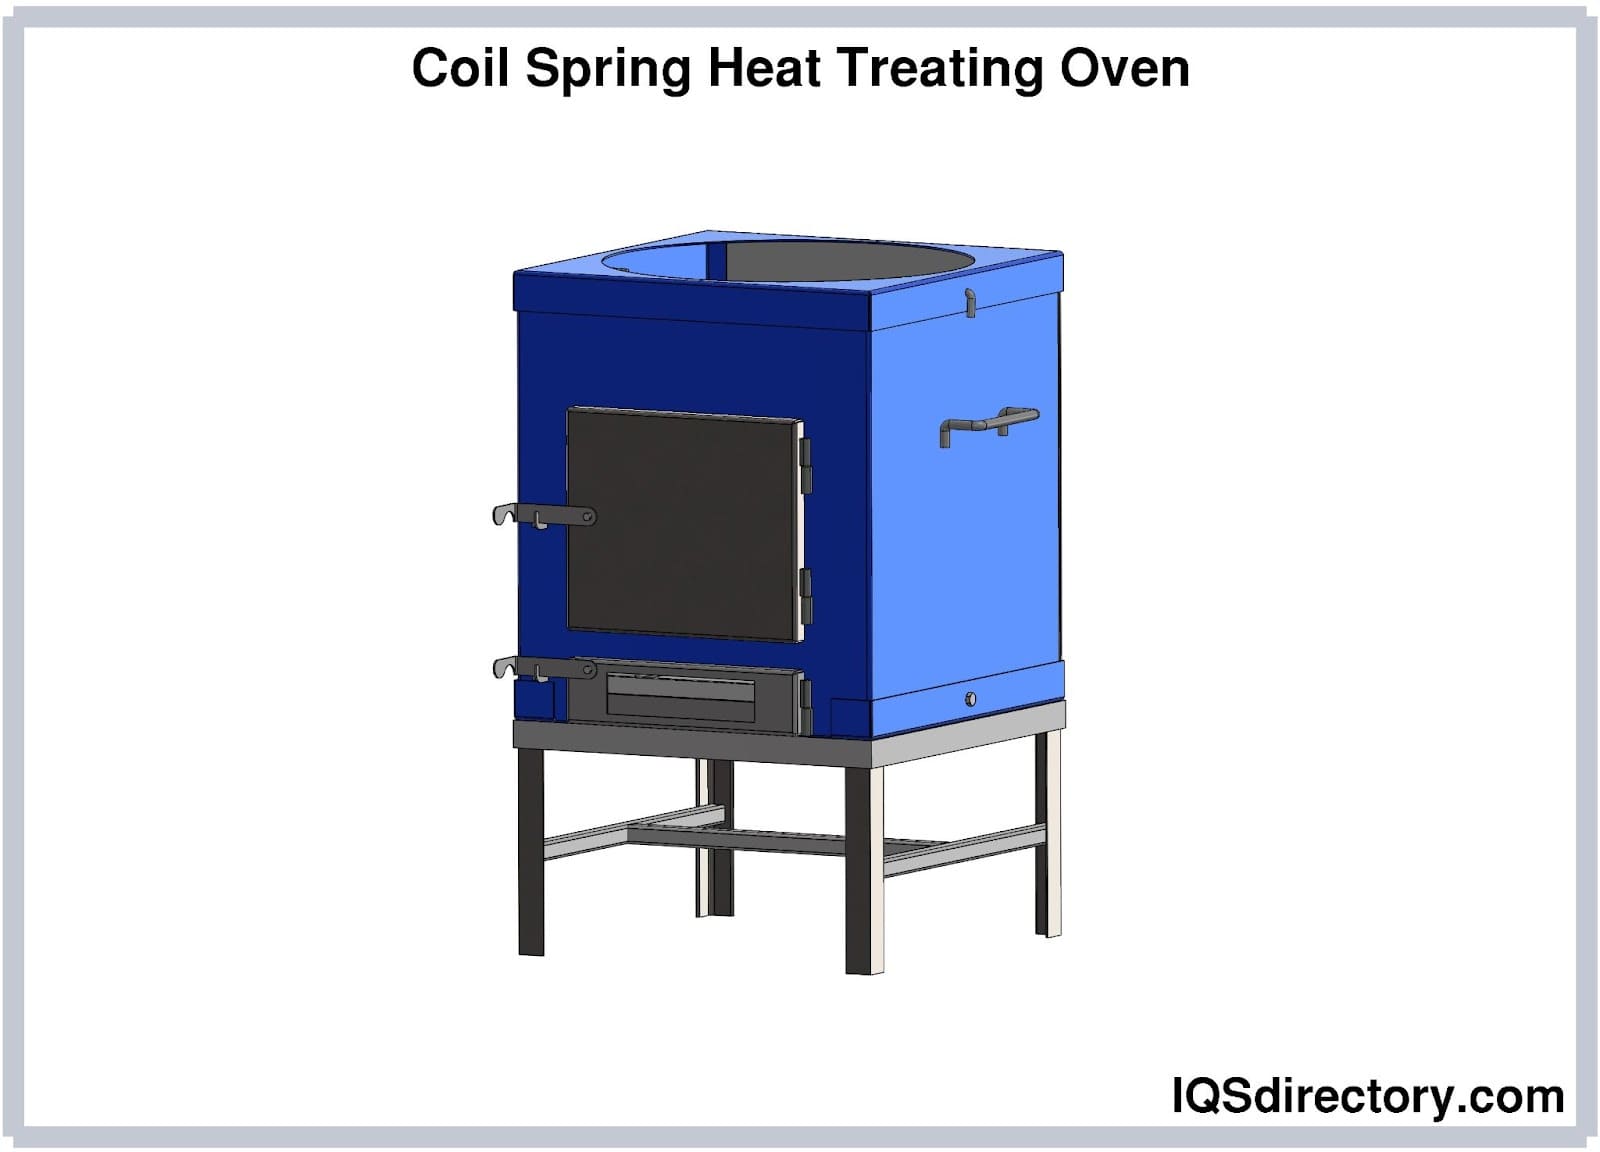 Coil Spring Heat Treating Oven